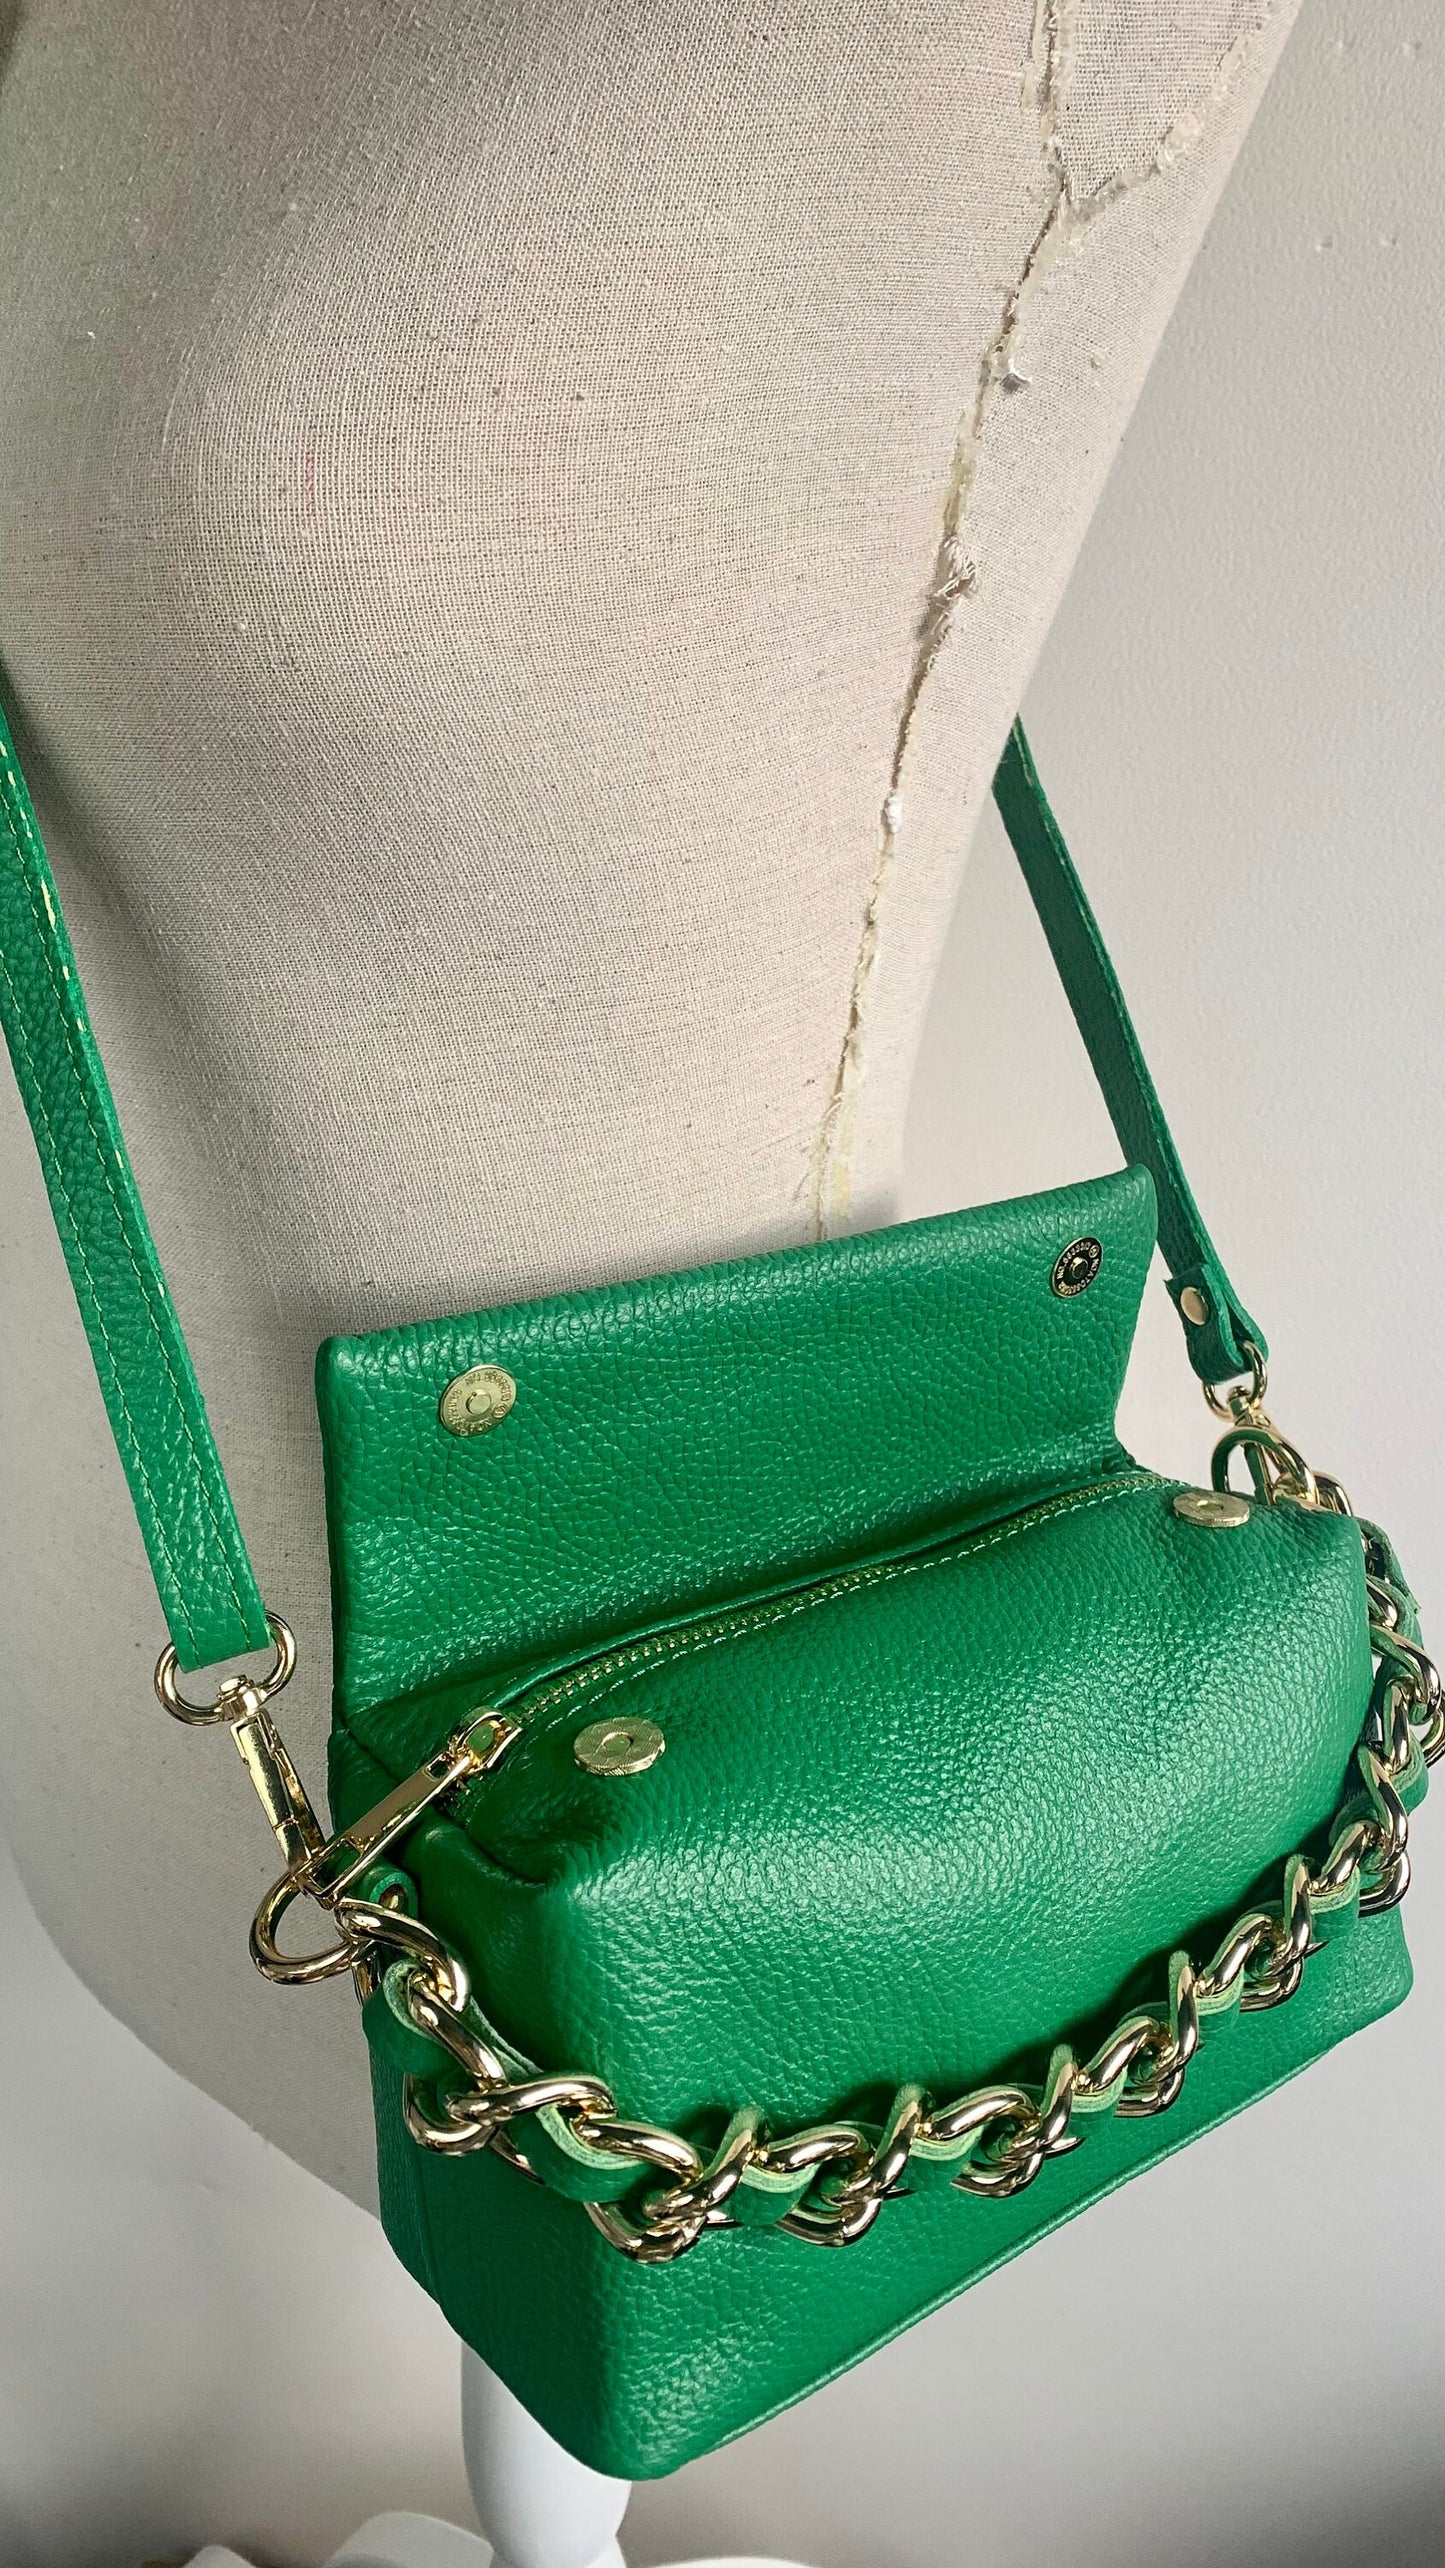 Green Boxy Bag With Chain Handle